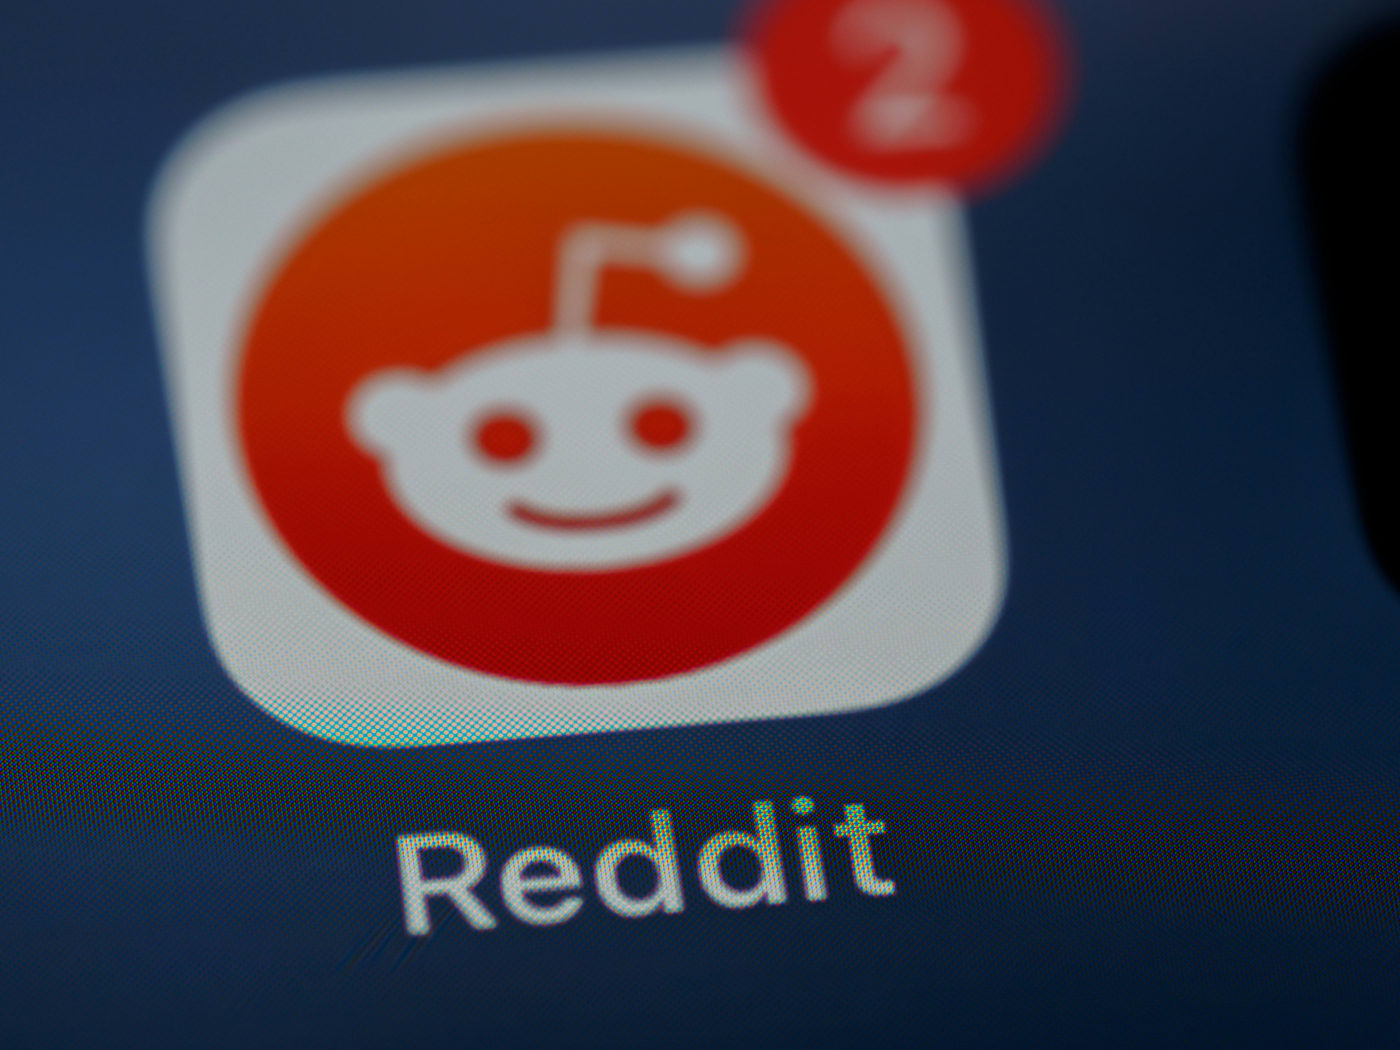 Reddit is back online after a major outage forced everyone to touch grass